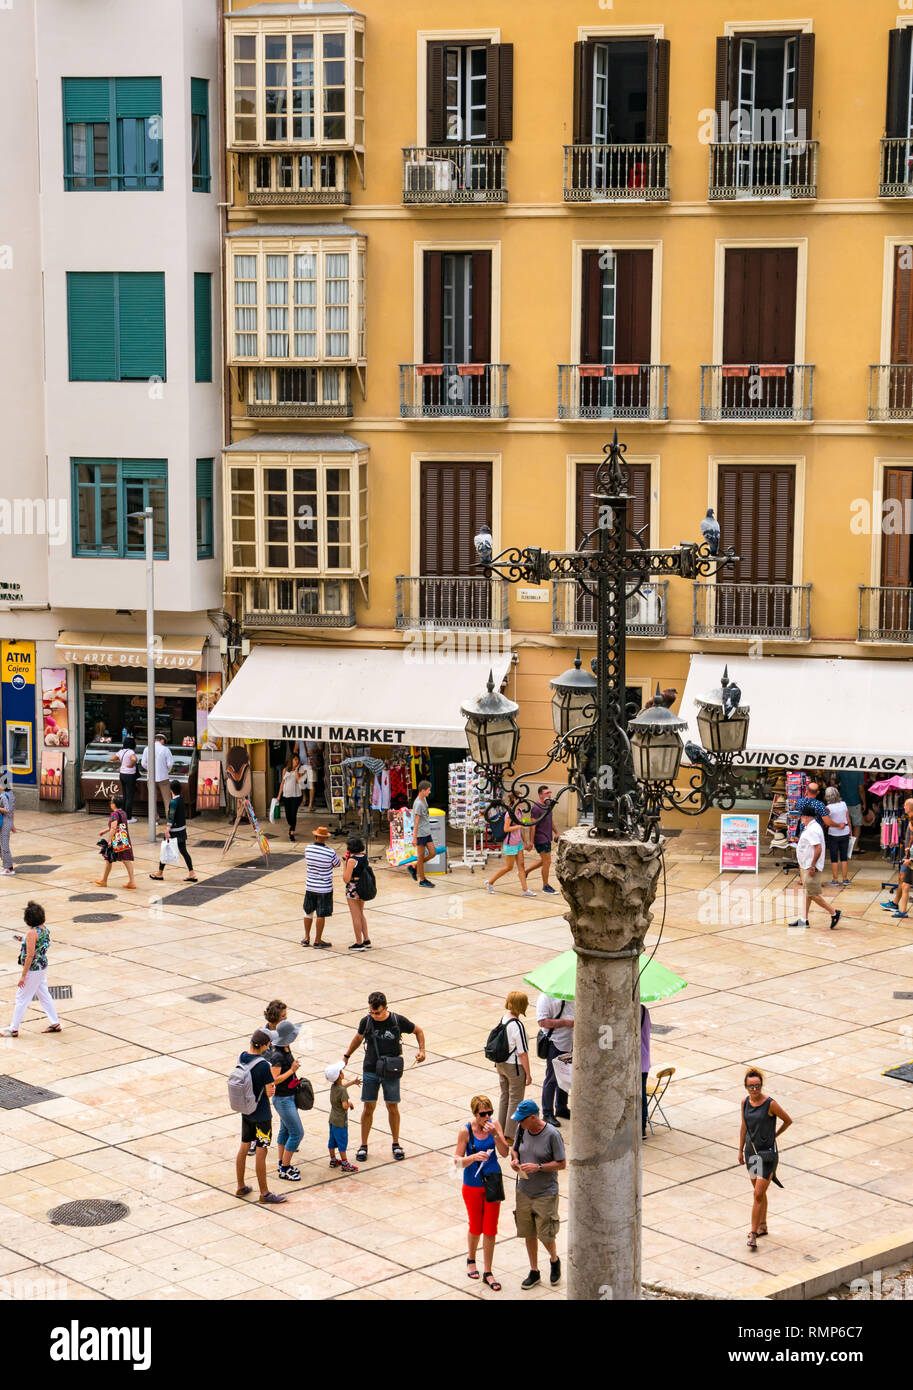 Old buildings and pedestrian street with mini market shop and ornate old fashioned streetlight, Malaga old town, Andalusia, Spain Stock Photo